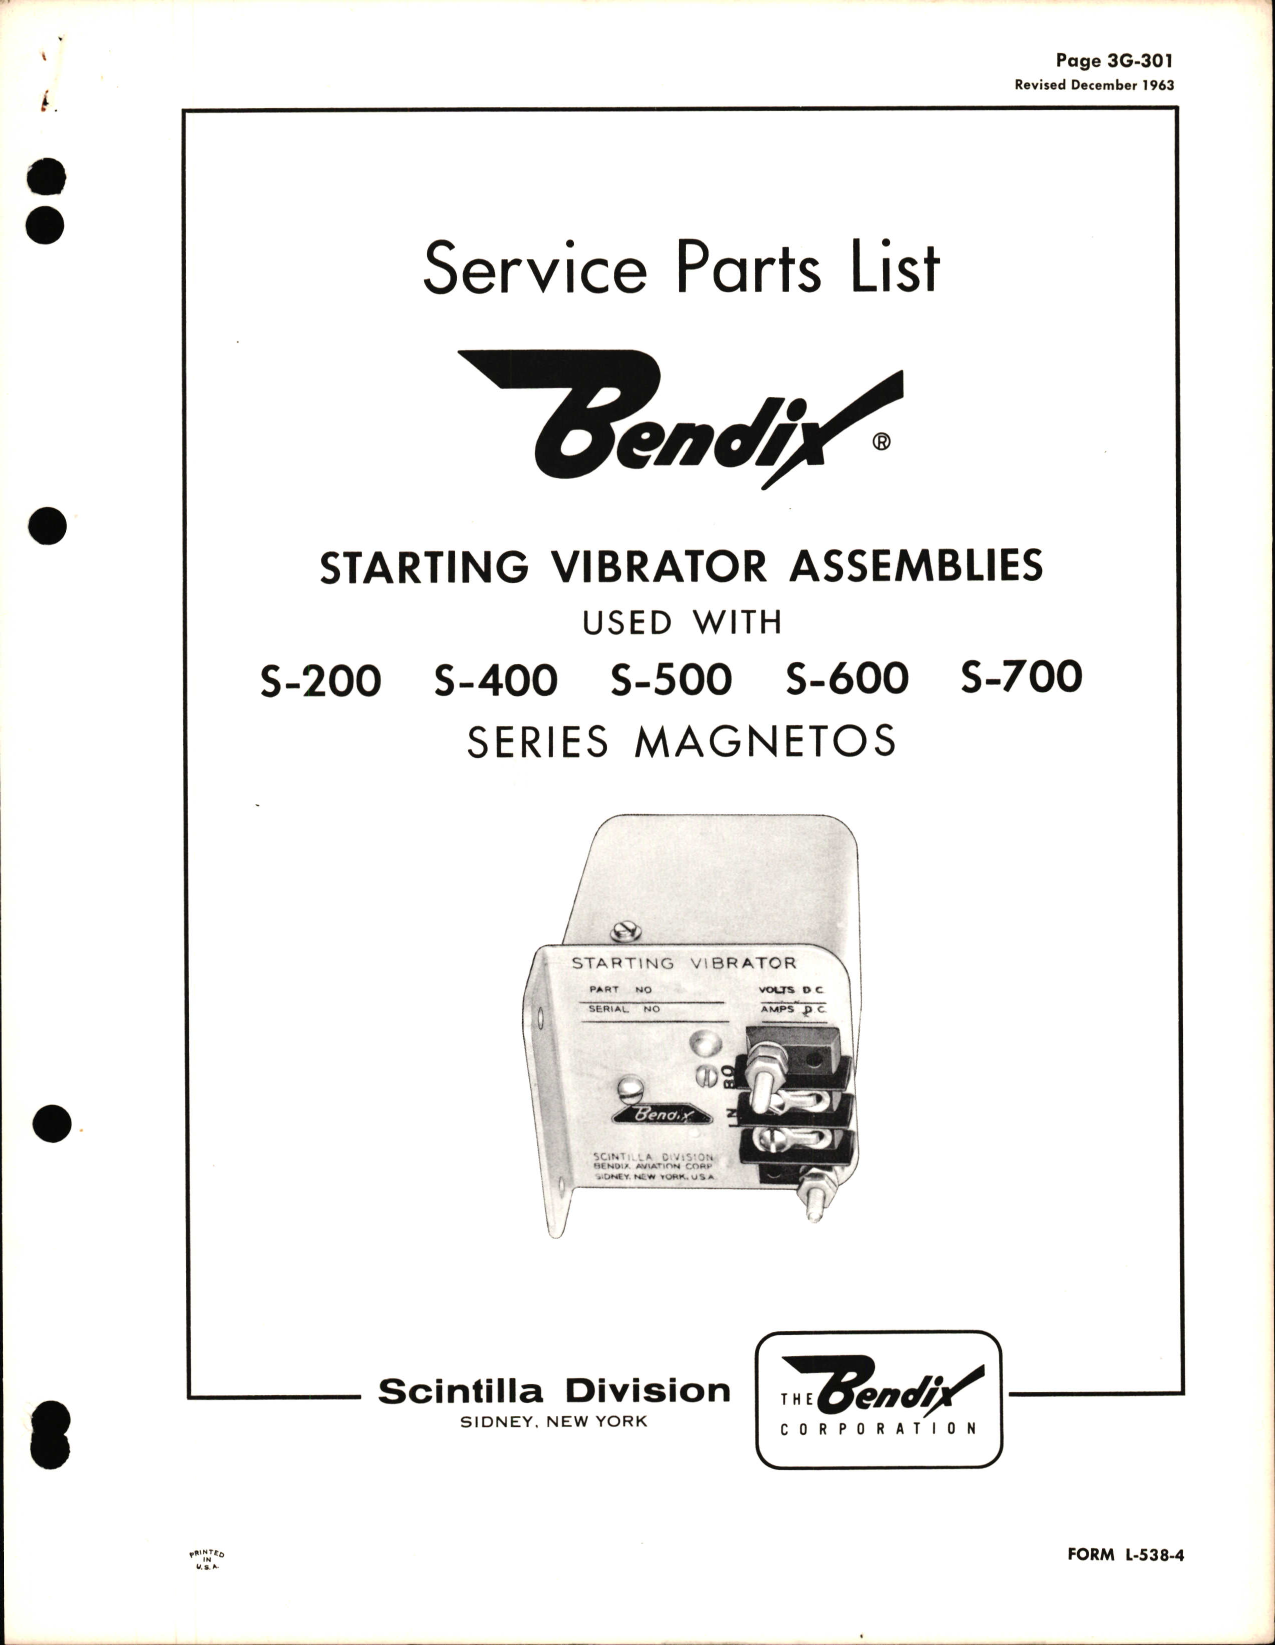 Sample page 1 from AirCorps Library document: Service Parts List for Starting Vibrator Assemblies S-200, S-400, S-500, S-600, and S-700 Magnetos